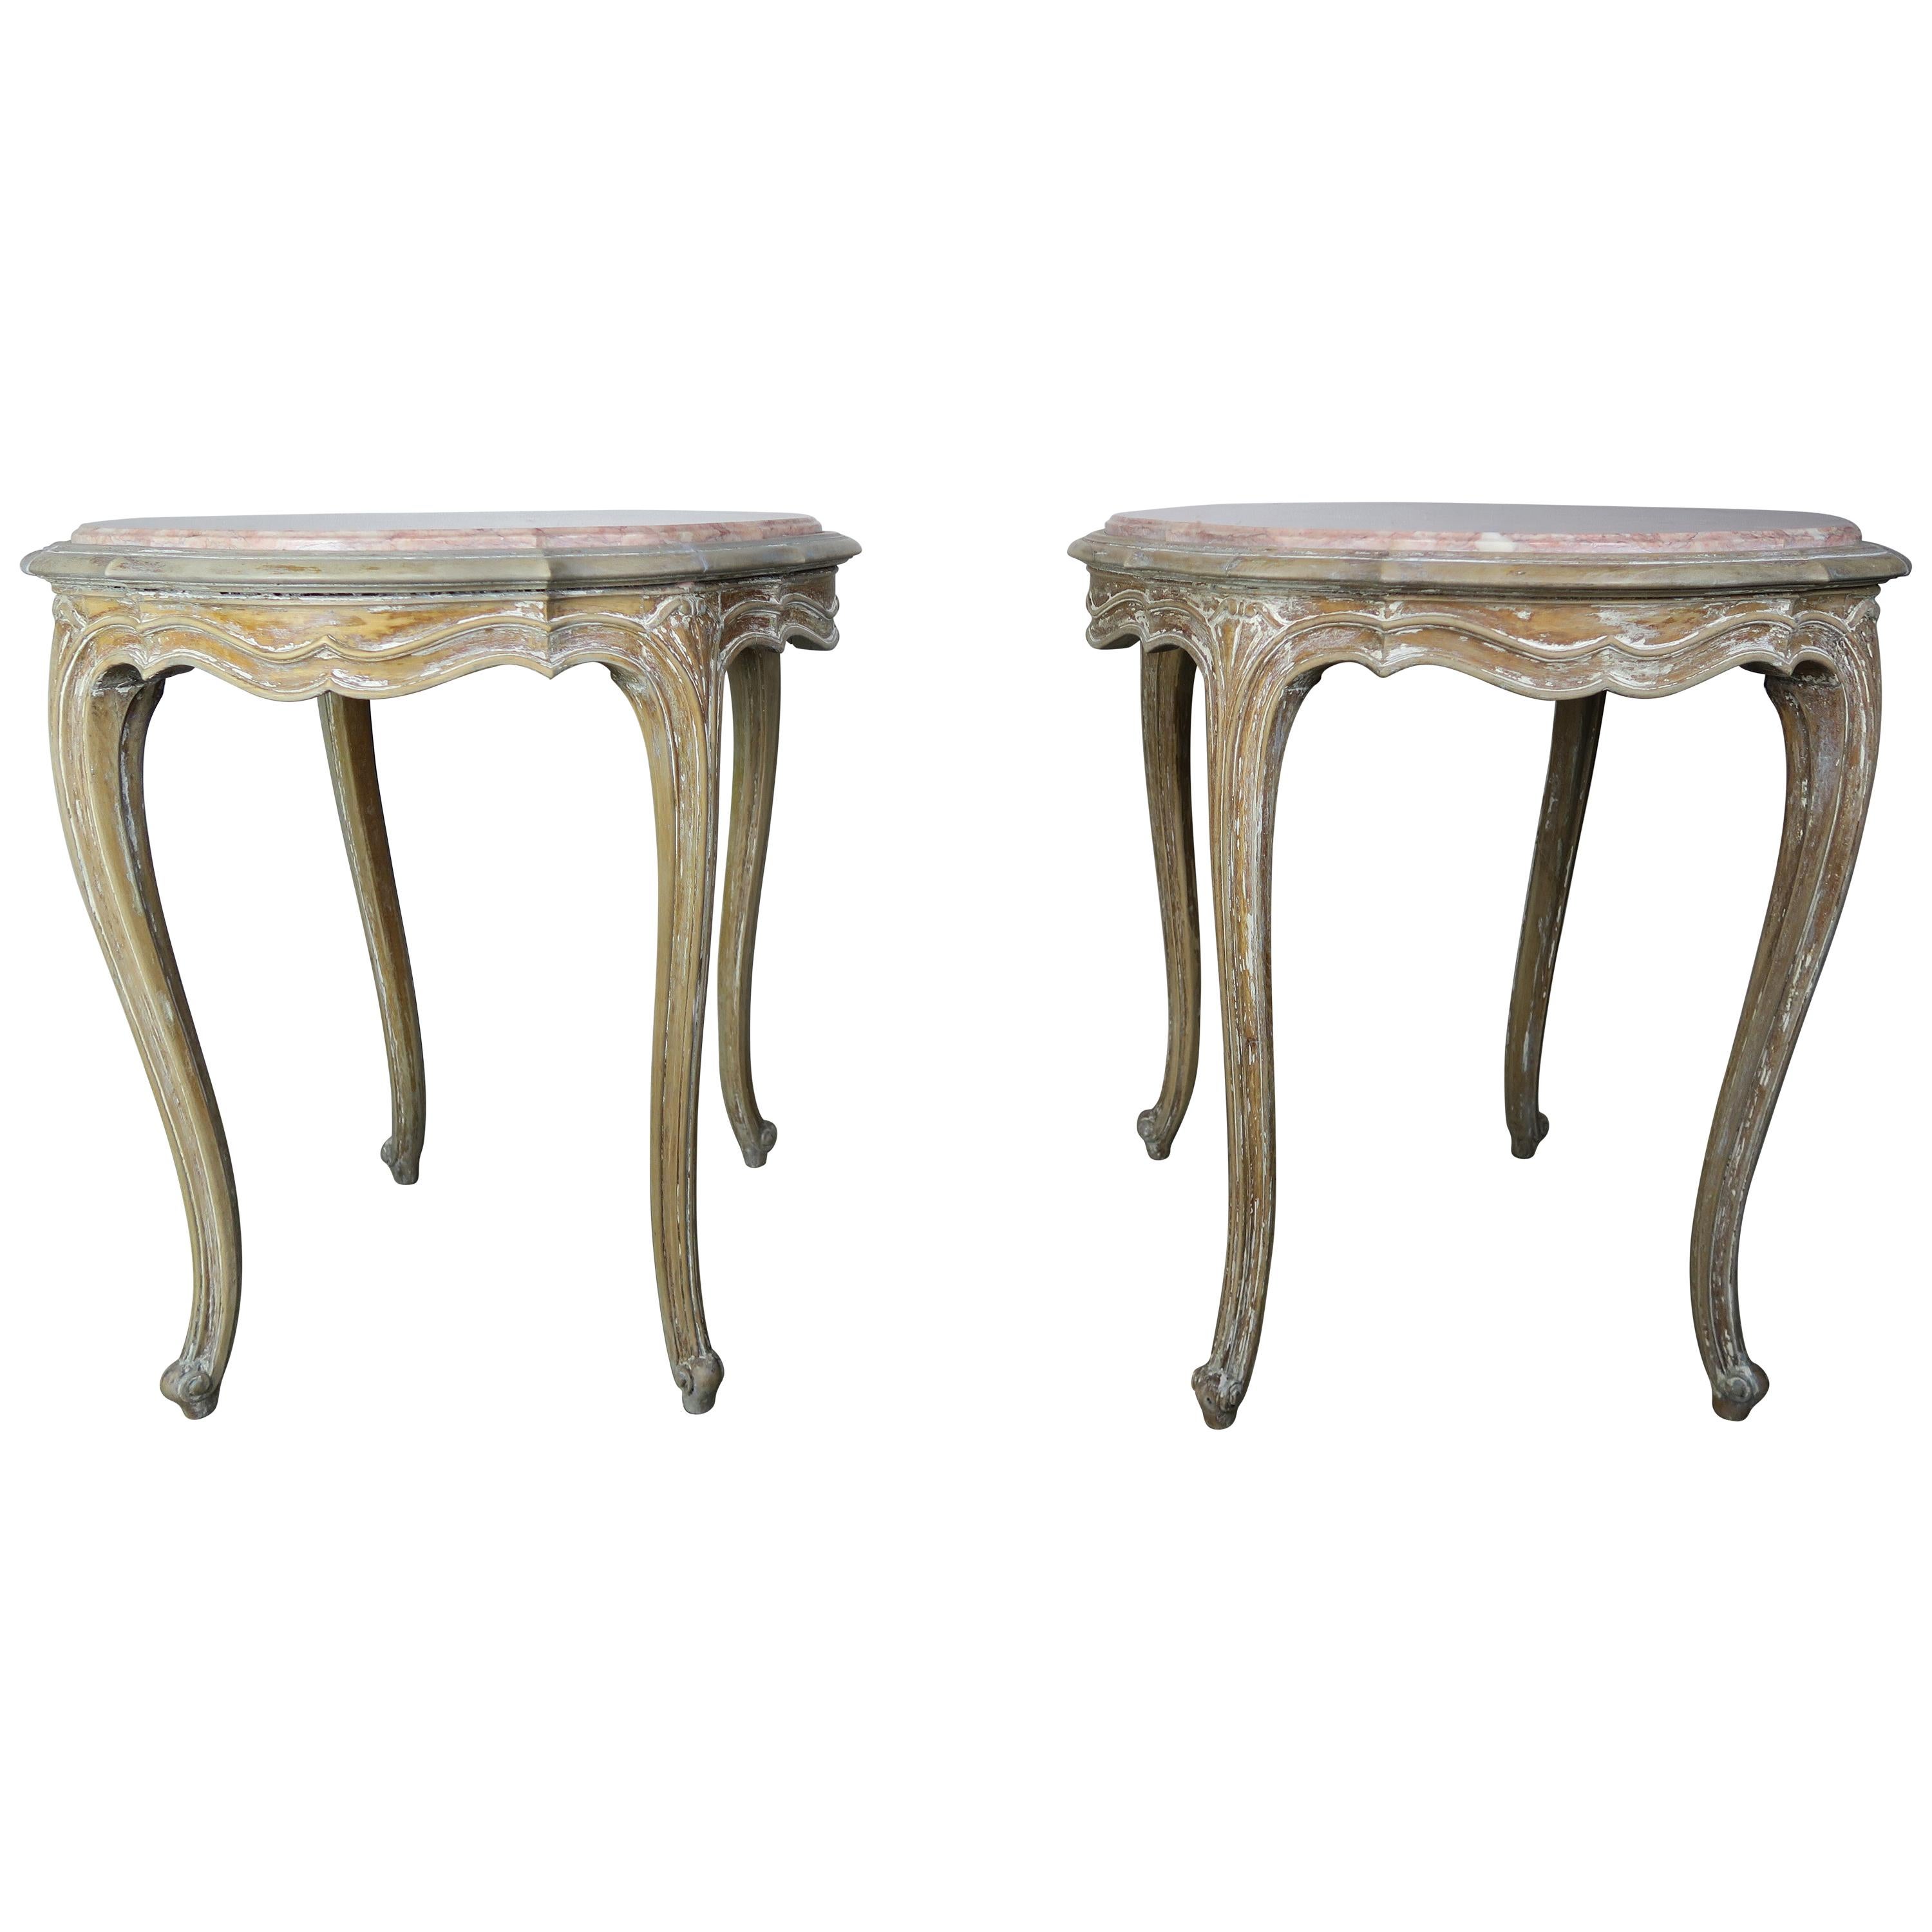 Pair of French Painted Table with Marble Tops, circa 1920s